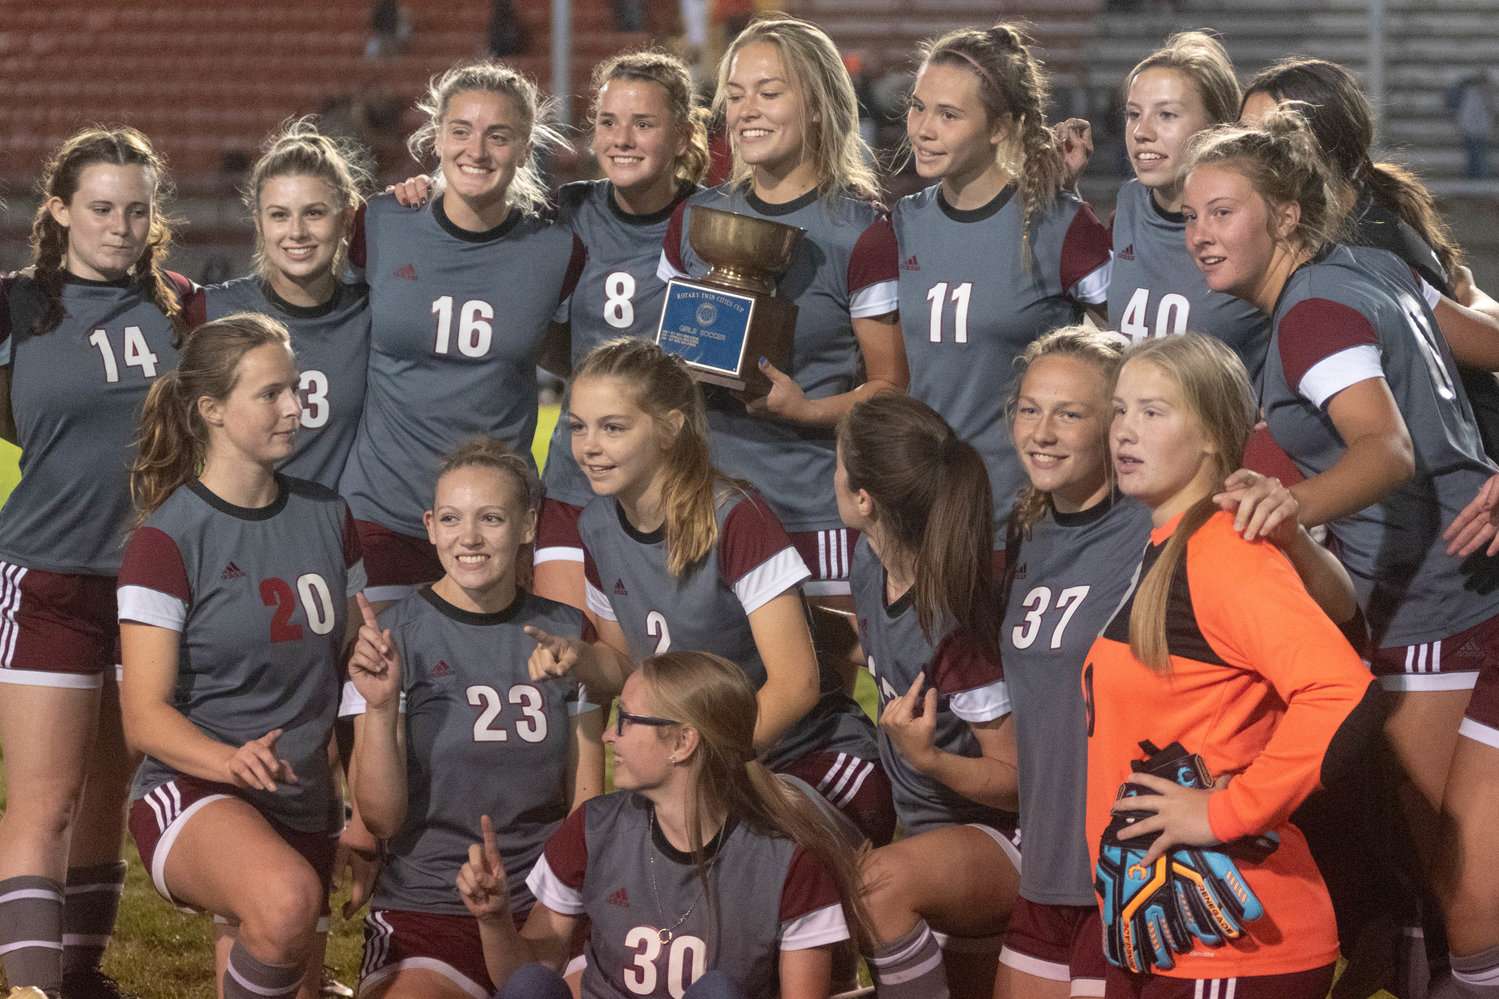 The W.F. West girls soccer team celebrates with the Rotary Cup after defeating Centralia Thursday night, 5-0.